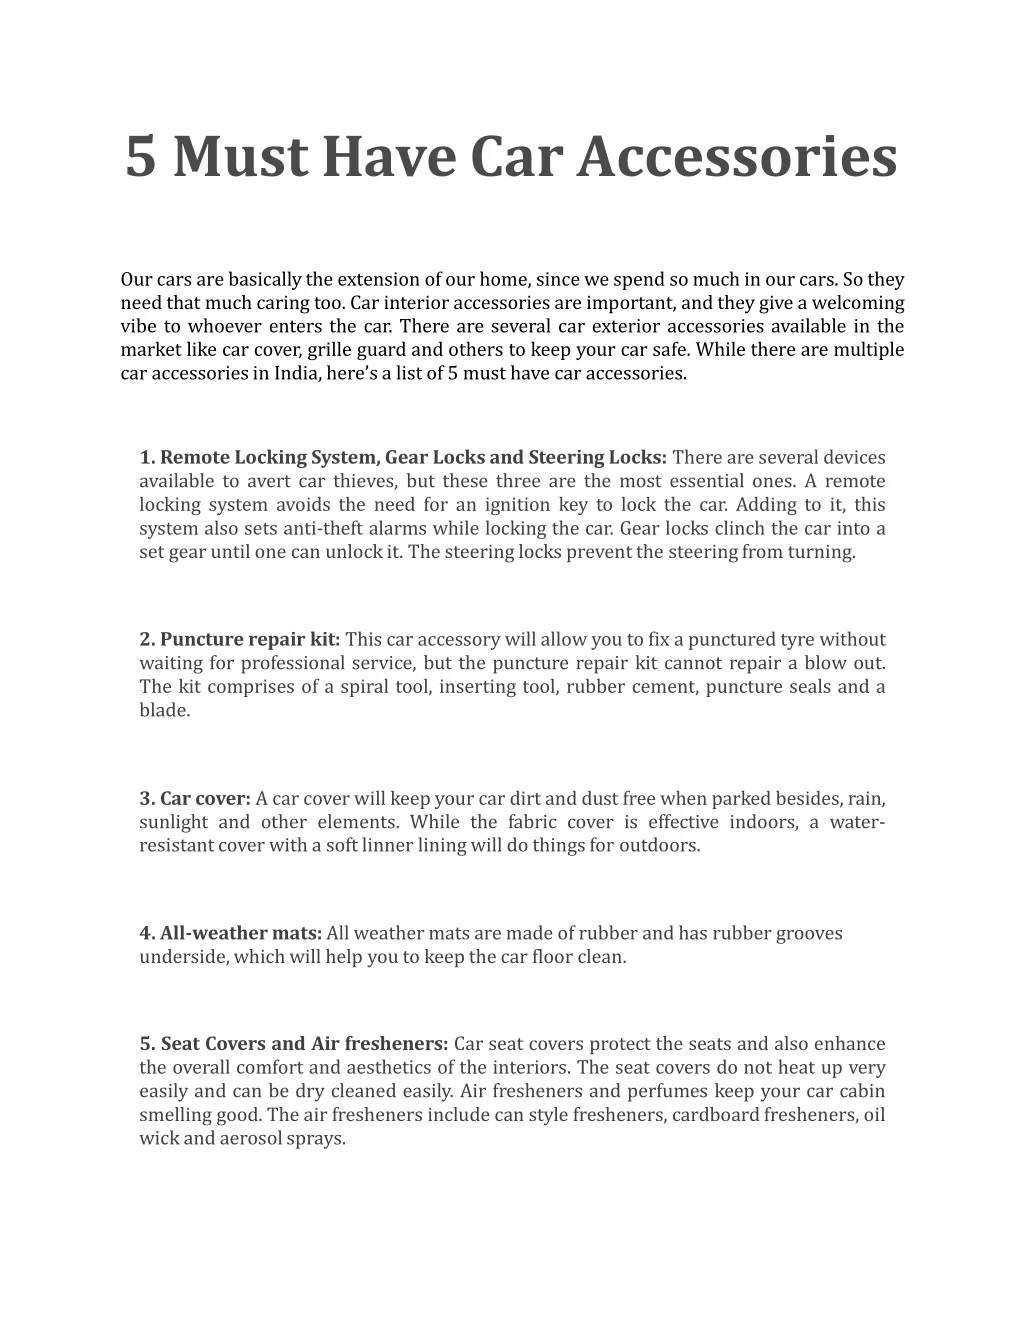 5 must have car accessories